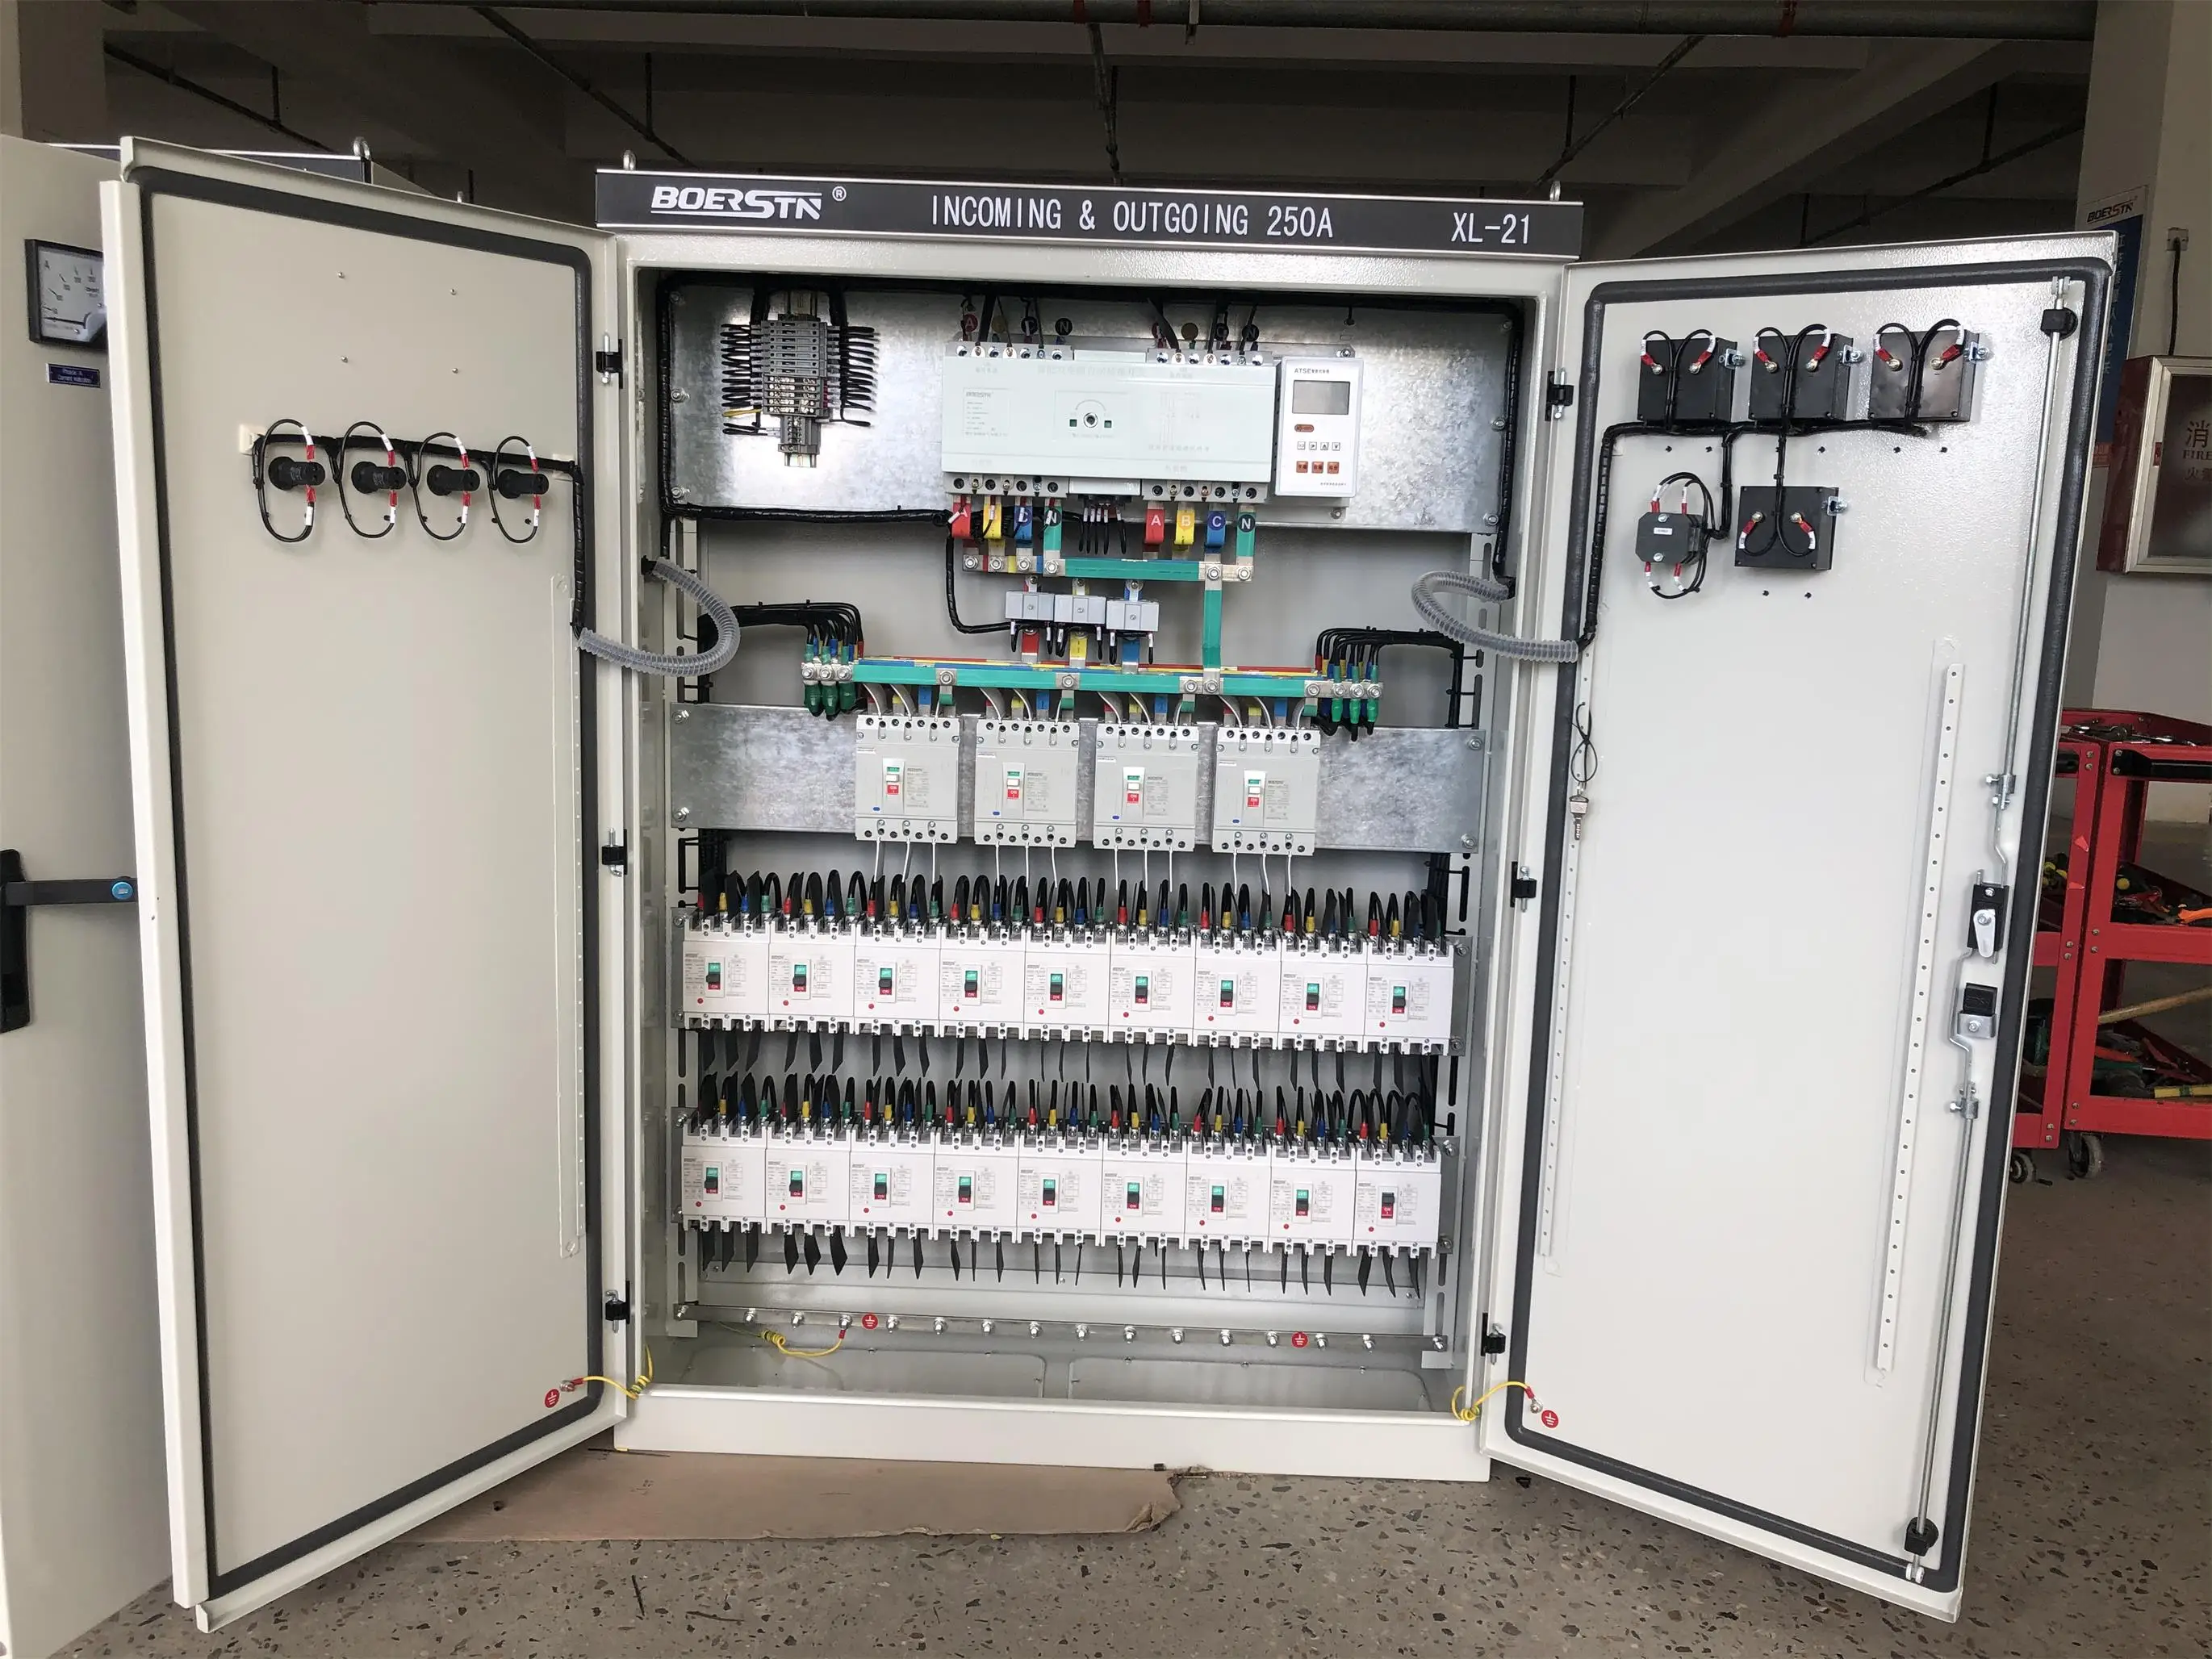 Ats Auto Transfer Switch Dual Power Incoming Outgoing Low Voltage Lv 250a Power Distribution Panel Xl 21 View Incoming Outgoing Panel Boerstn Product Details From Boerstn Electric Co Ltd On Alibaba Com